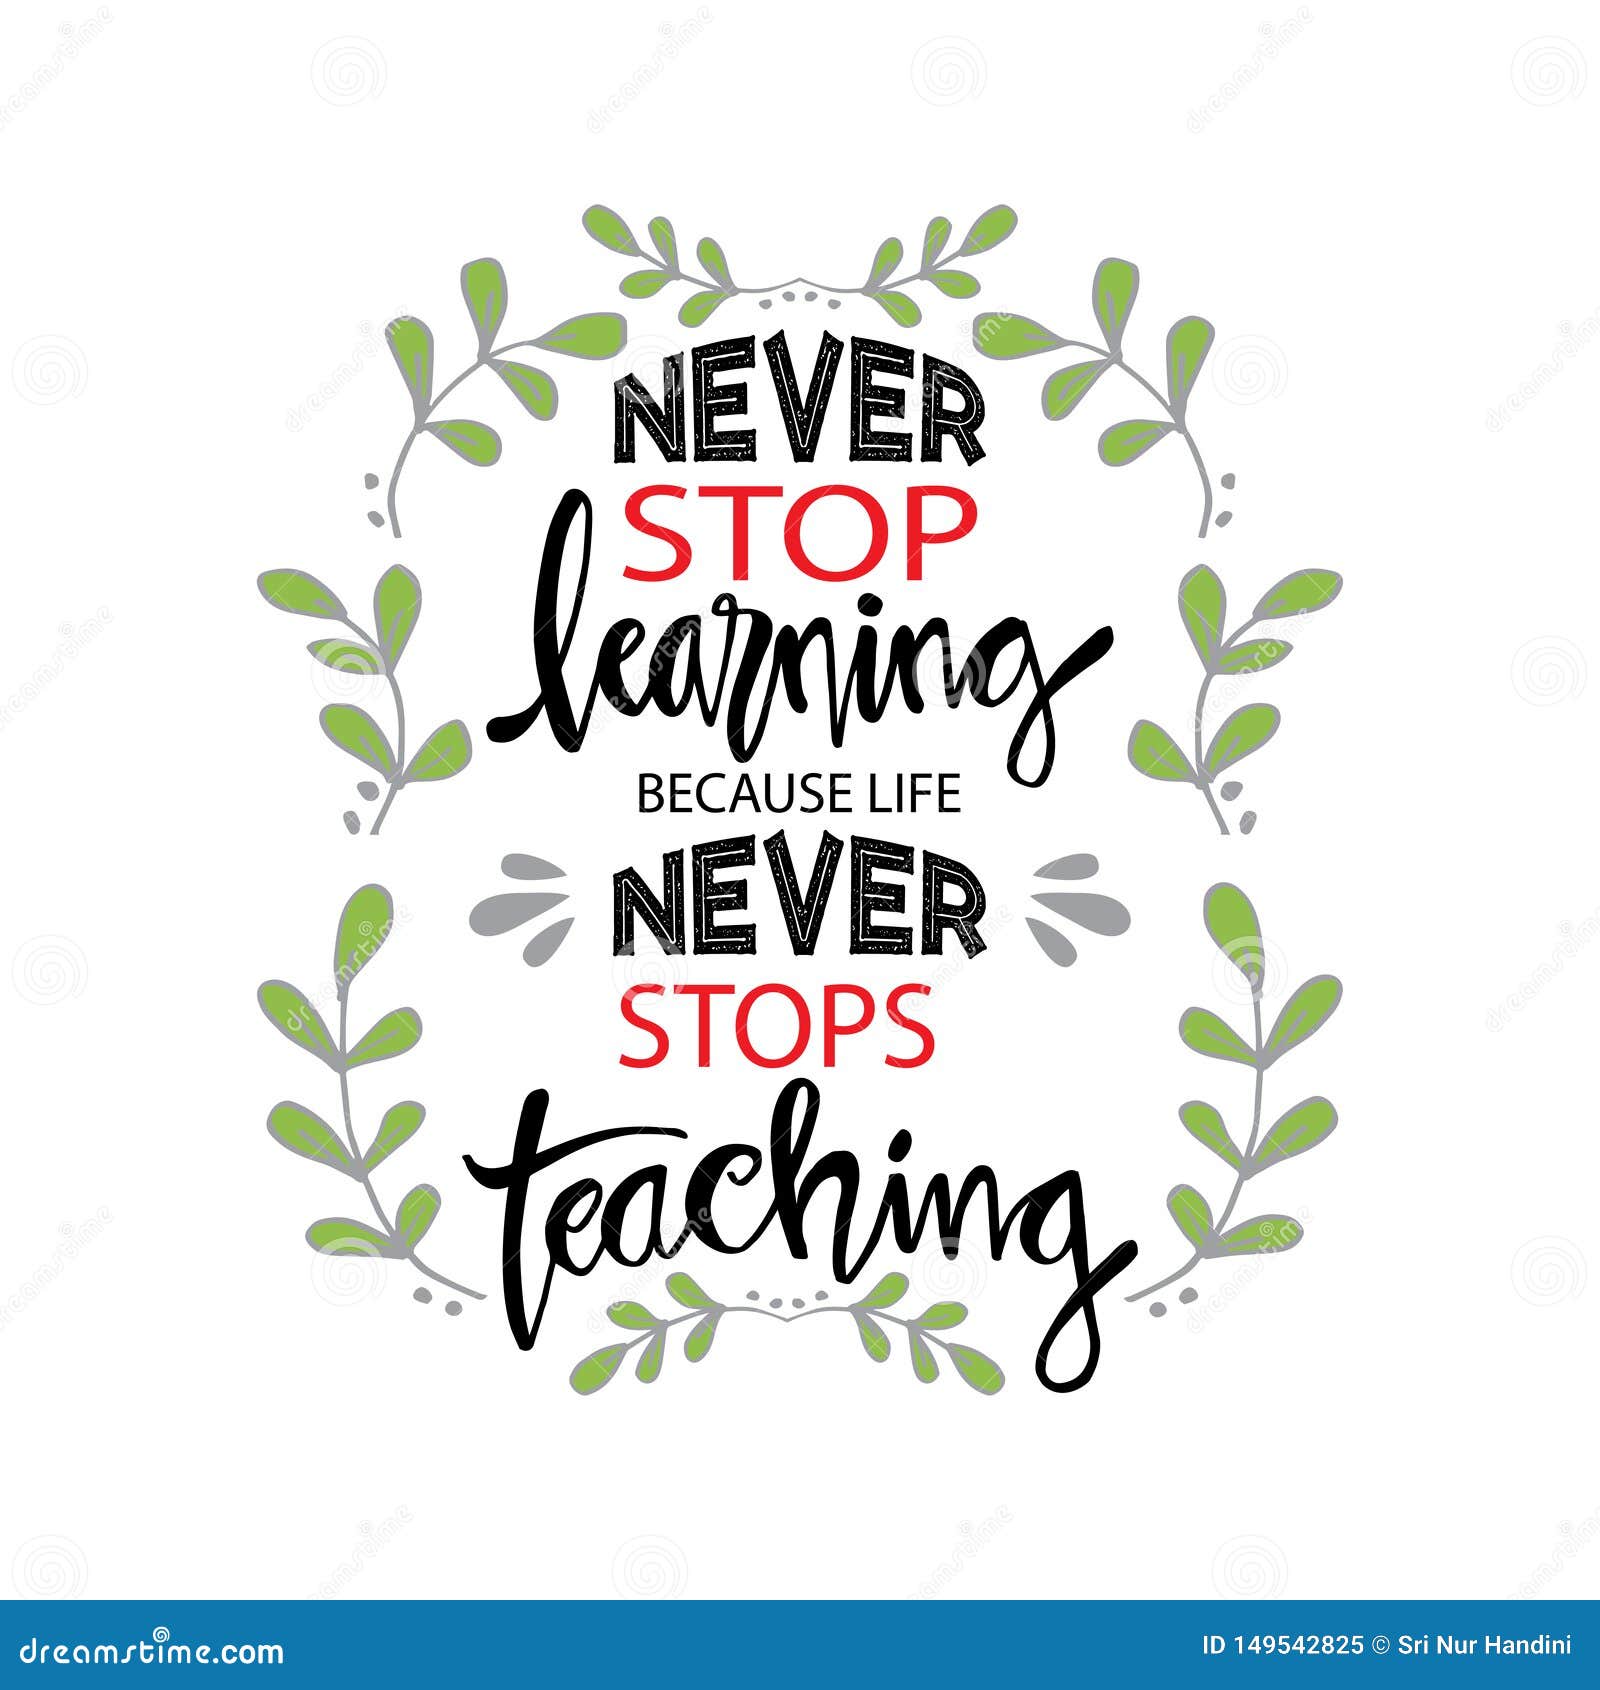 never stop learning, because life never stops teaching.